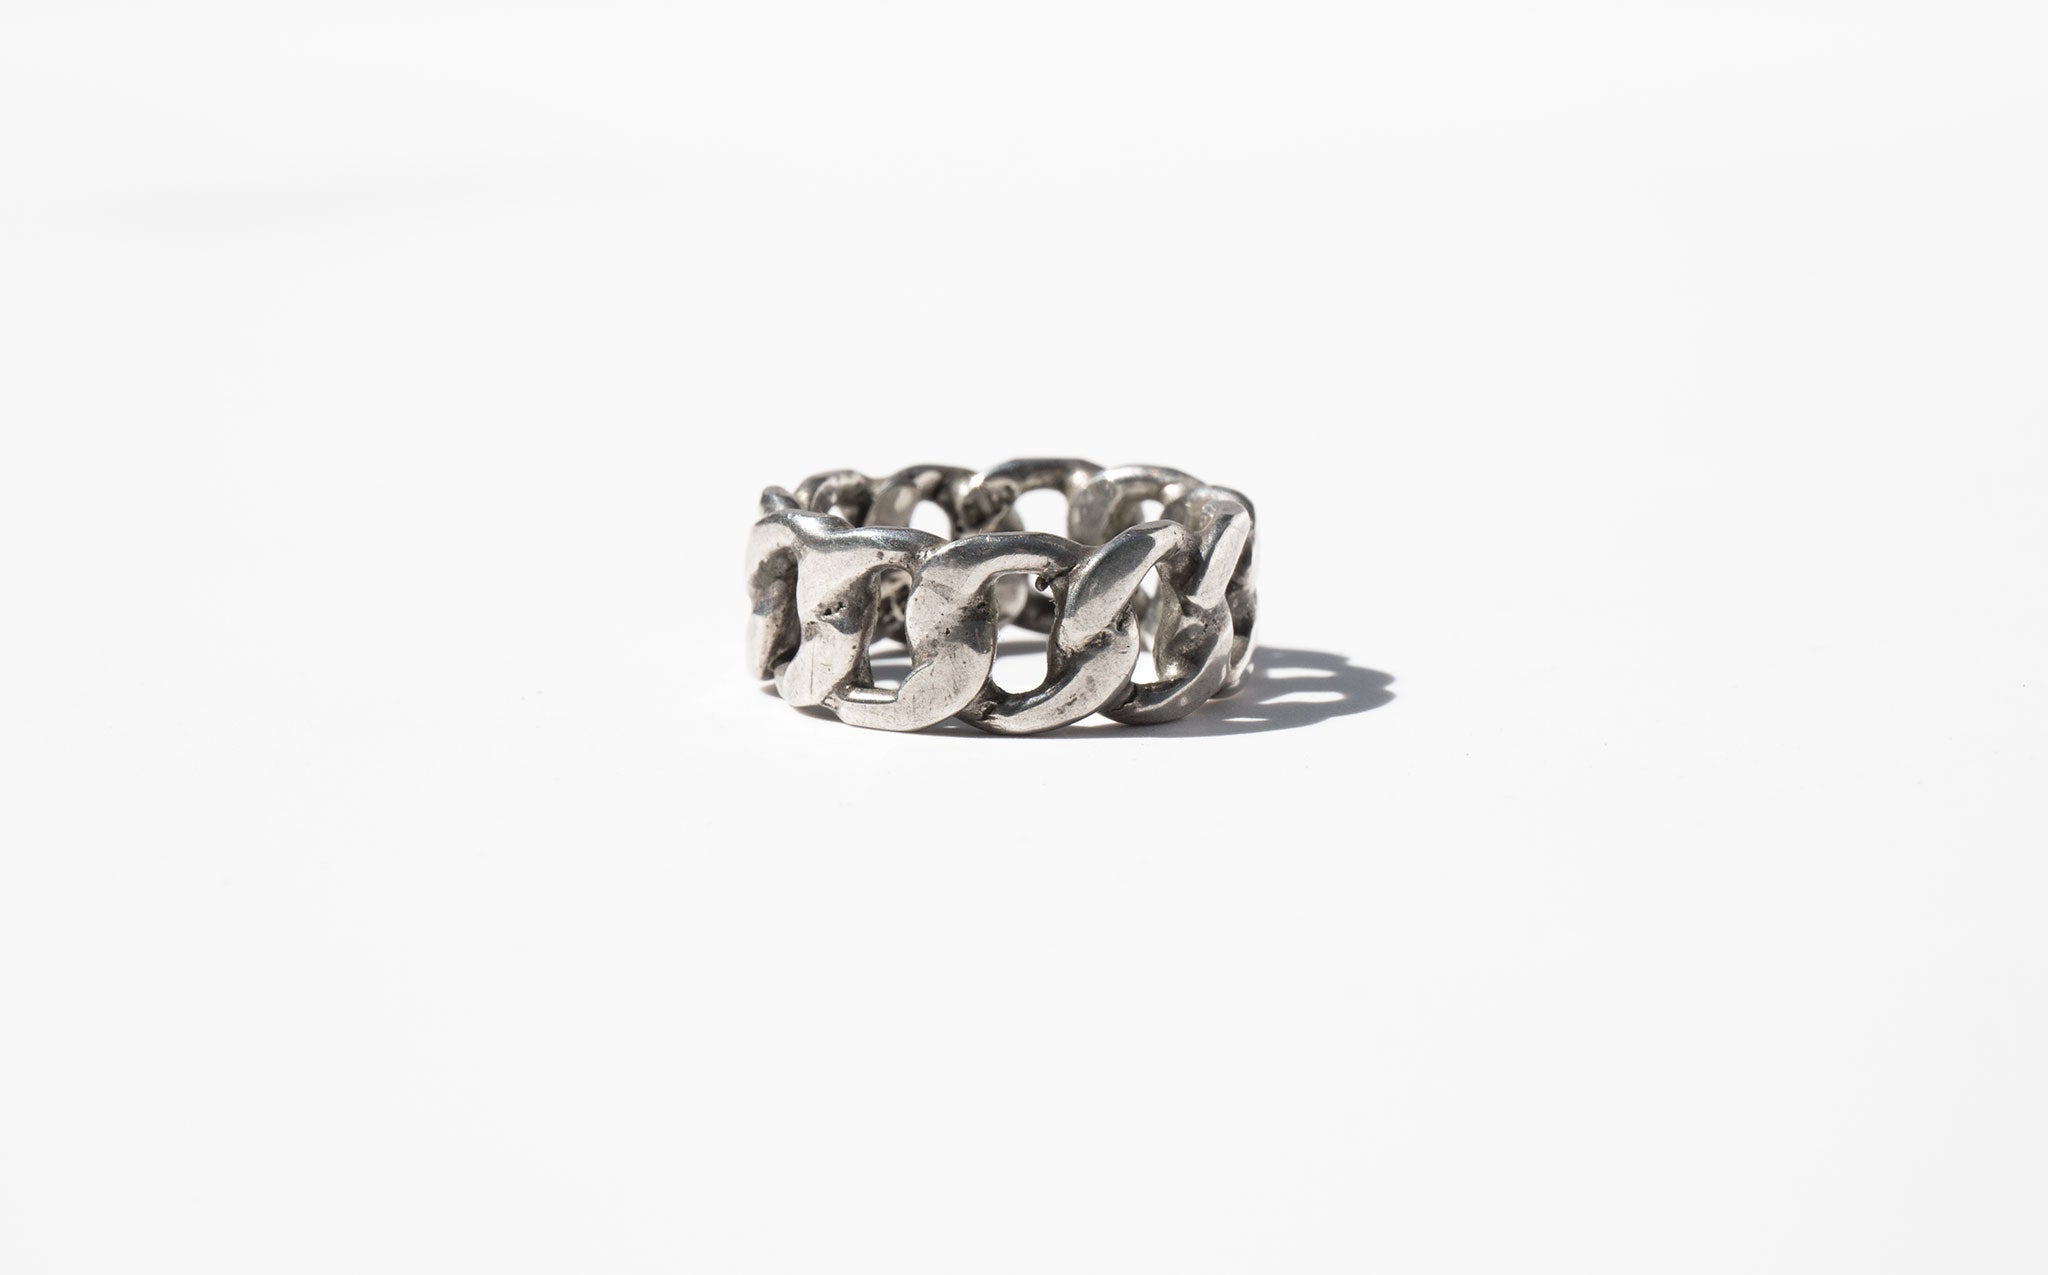 Sterling Silver Link Ring